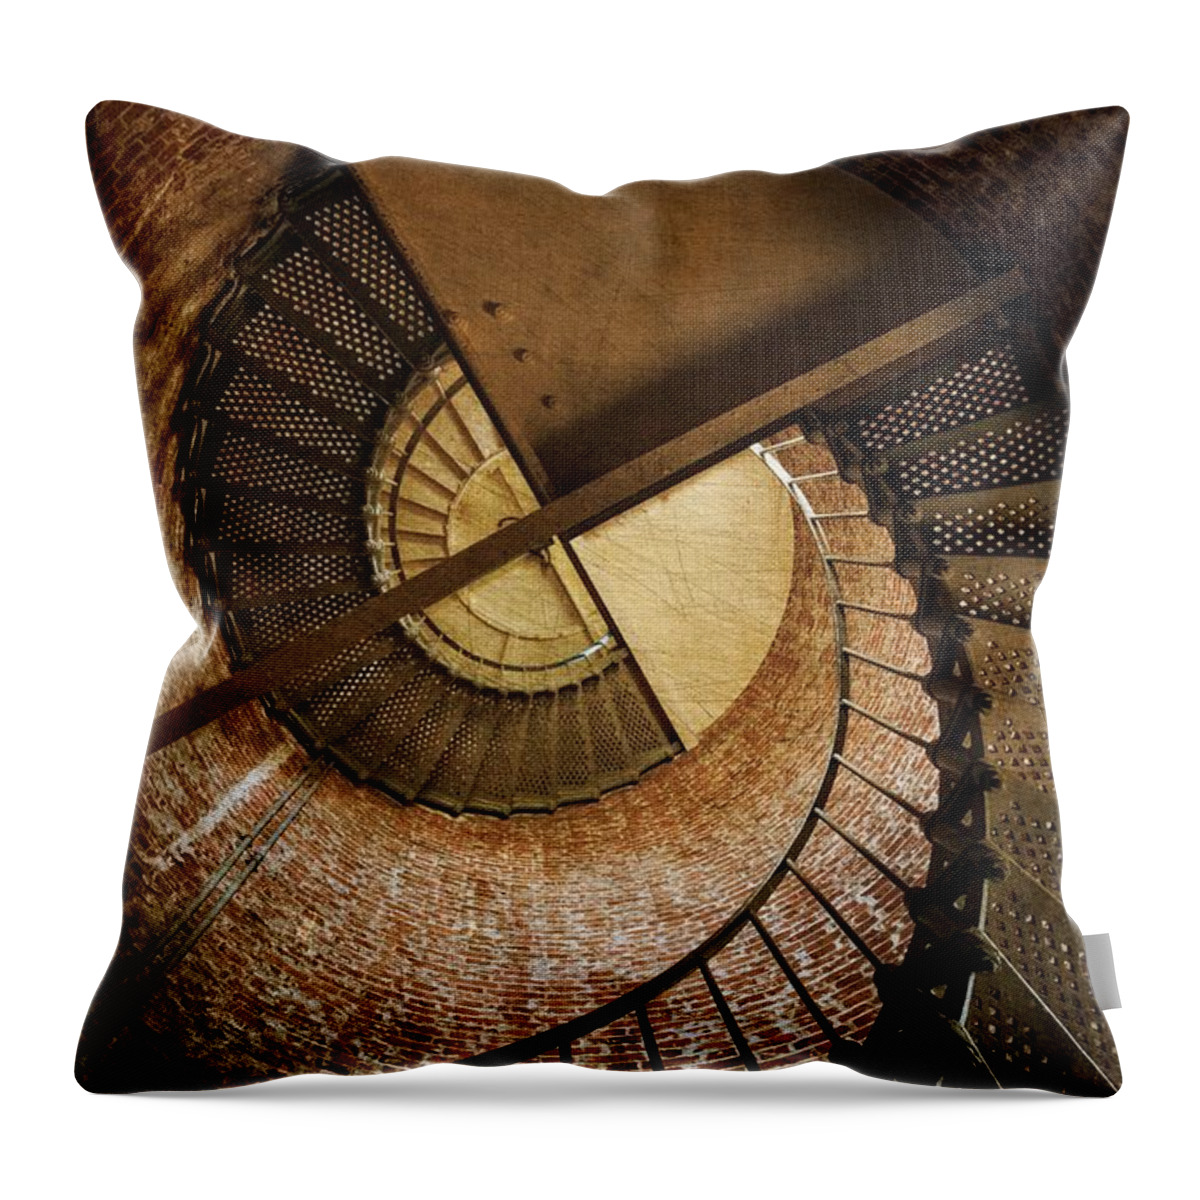 Cape Blanco Lighthouse Throw Pillow featuring the photograph Upward by Ken Smith